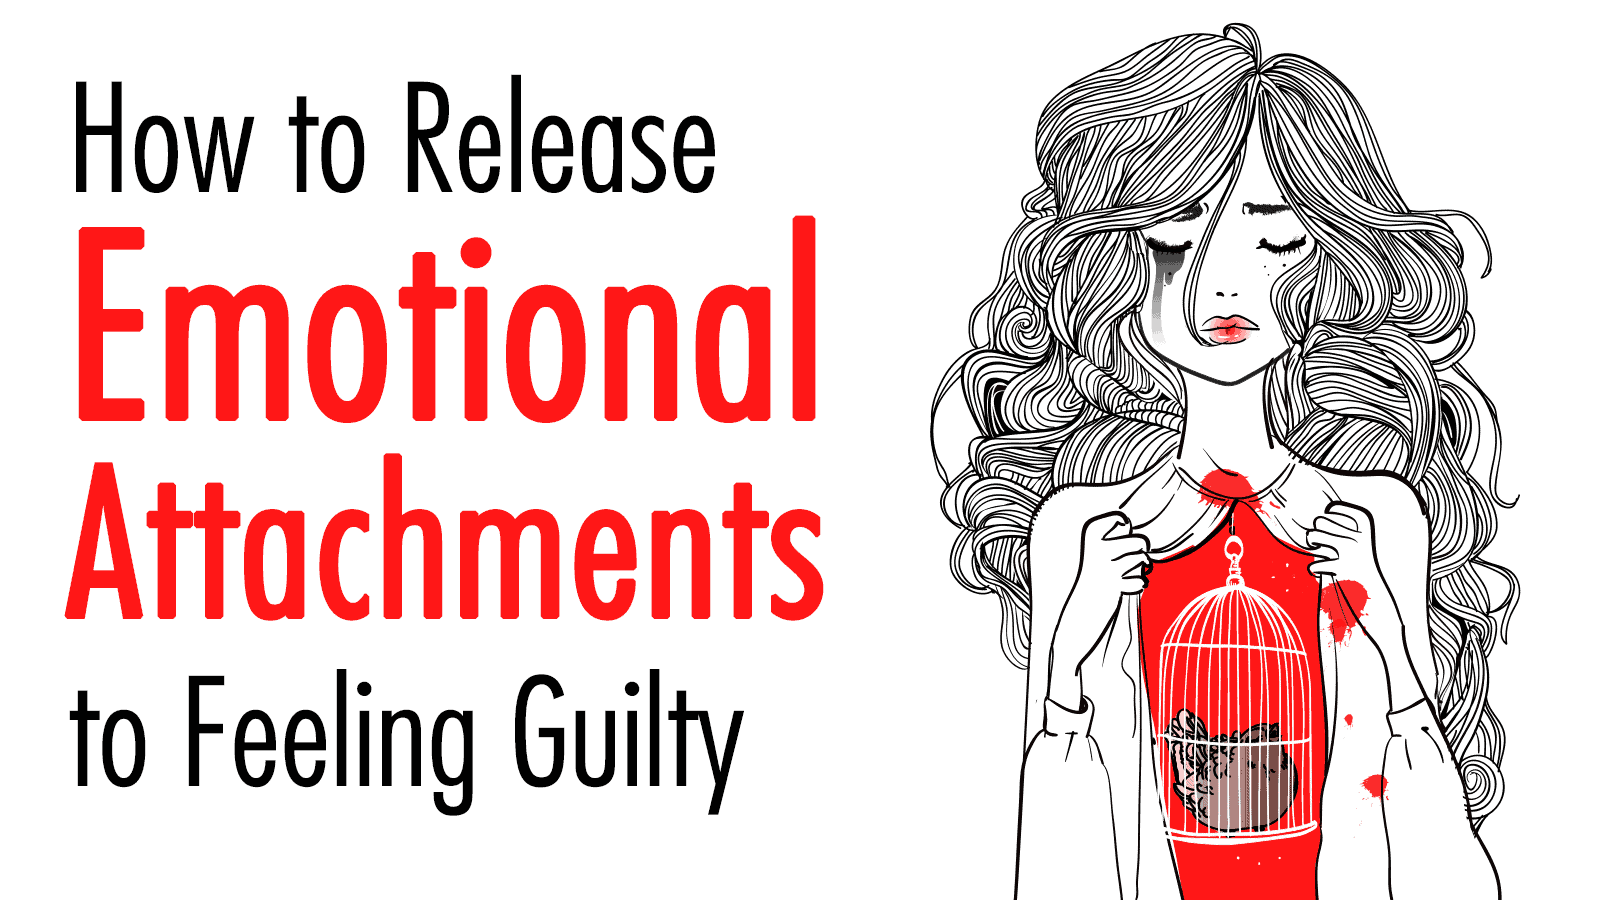 How to Release Emotional Attachments to Feeling Guilty